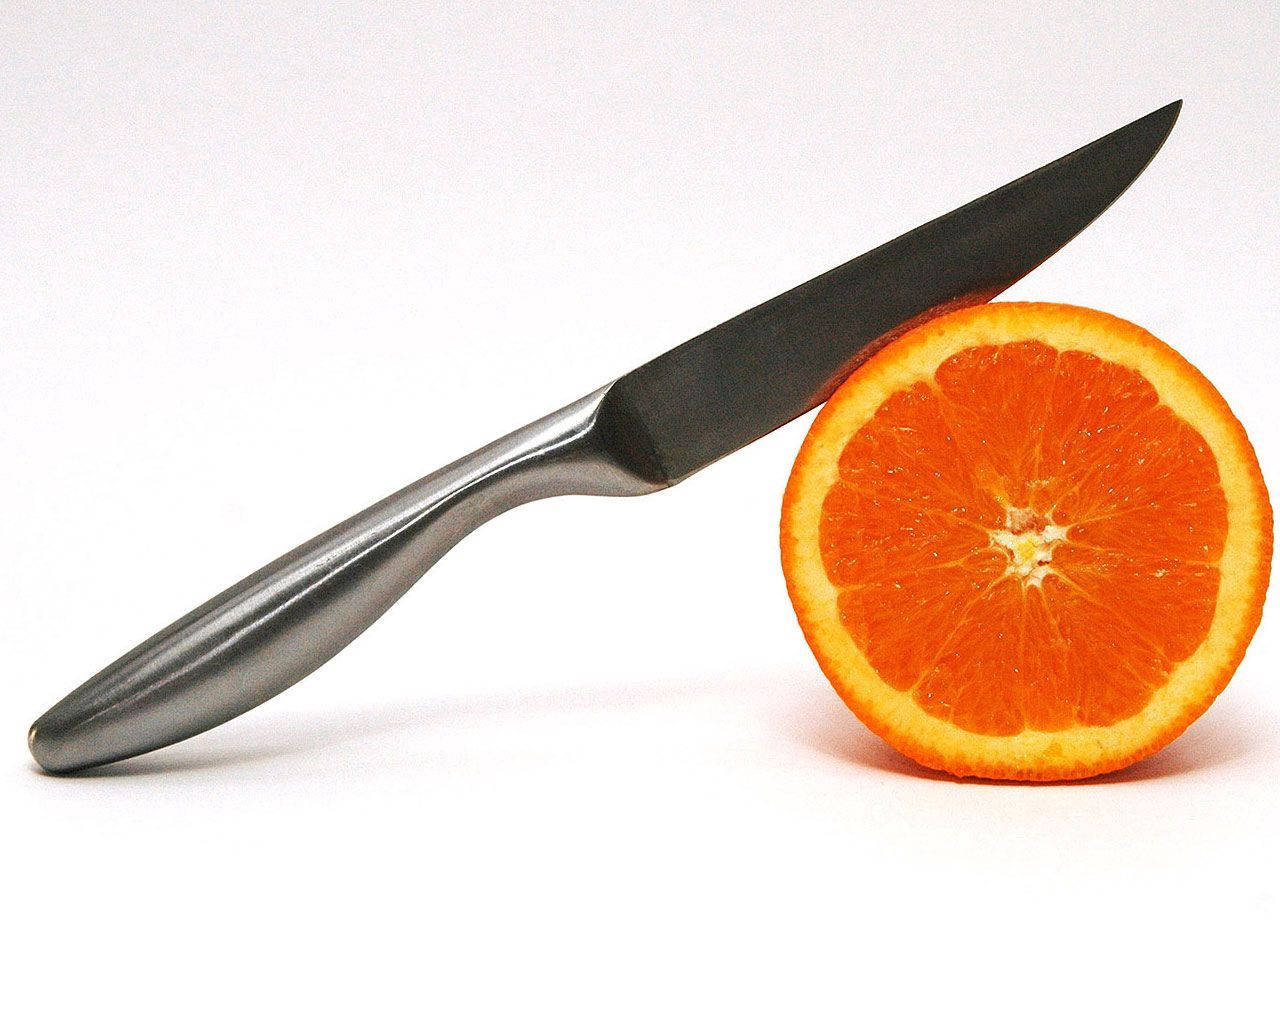 Cut Open, An Orange Provides A Refreshing Burst Of Natural Sweetness.